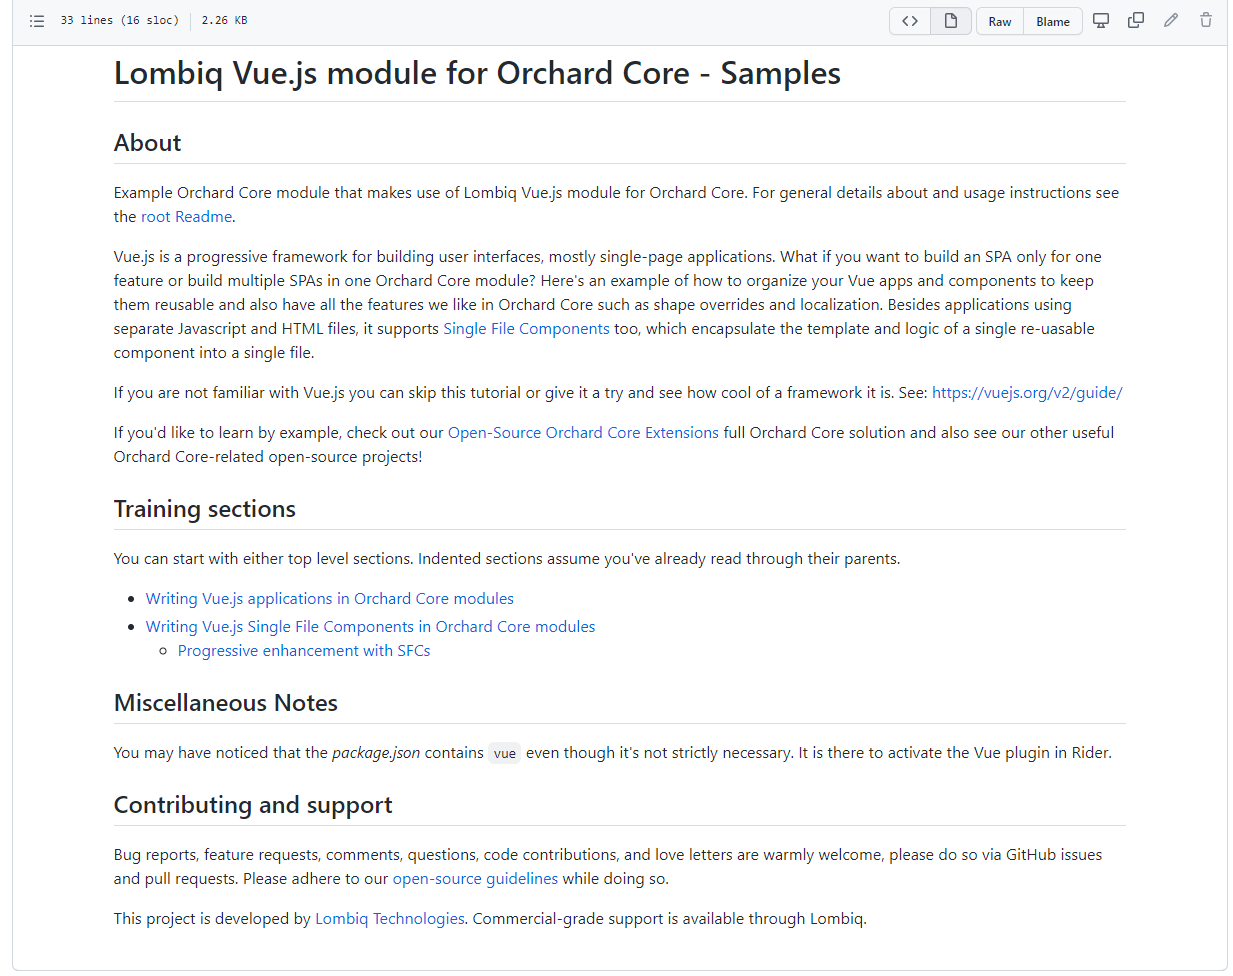 Readme of the Lombiq Vue.js module for Orchard Core samples